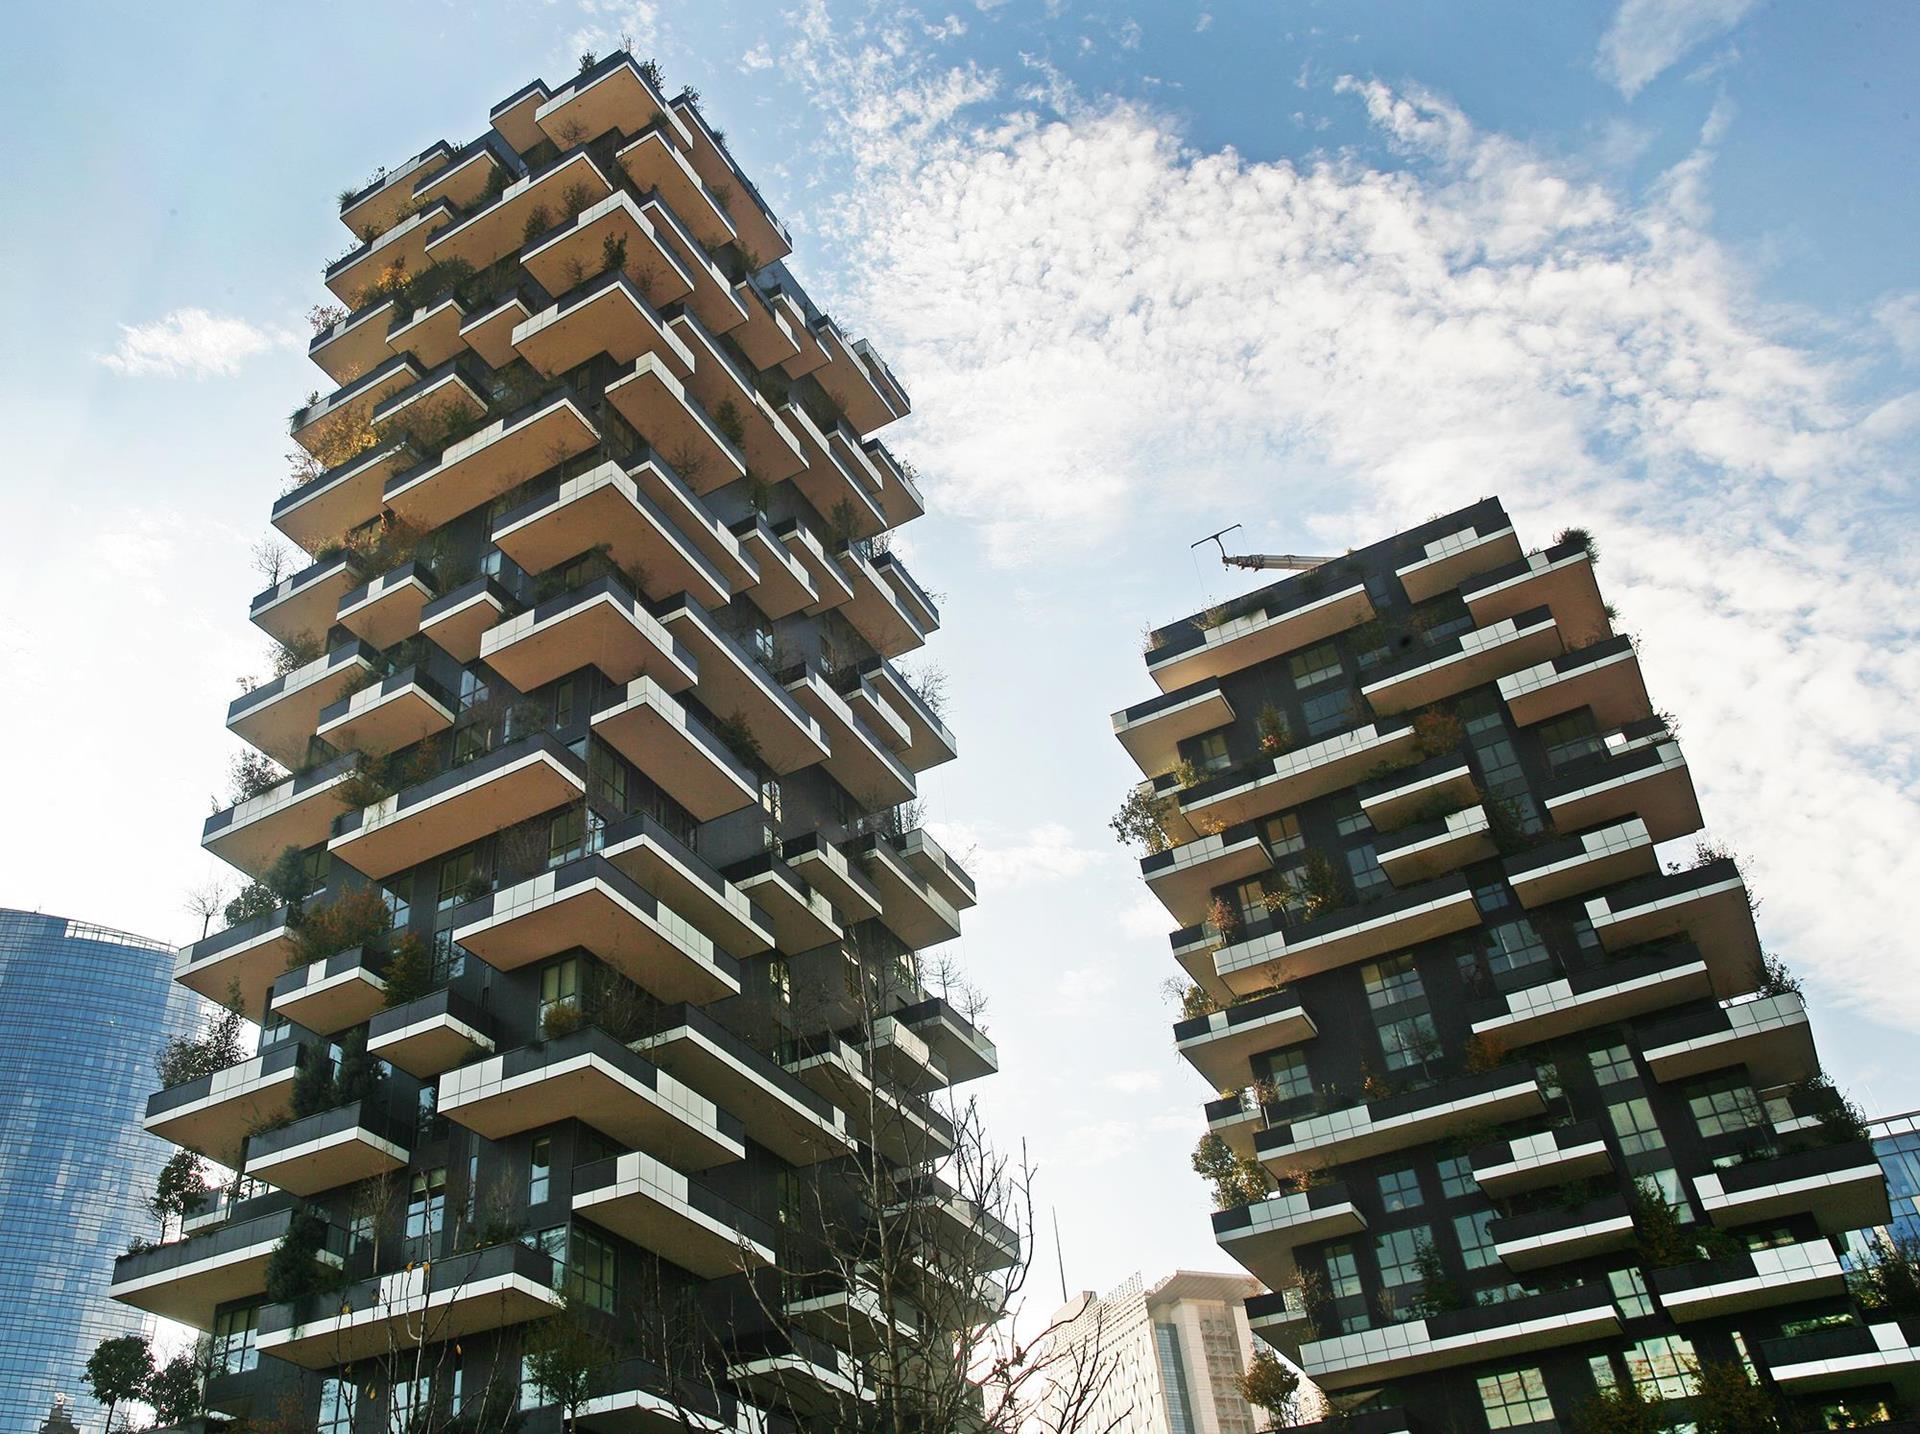 Vertical Forest: Photo 2